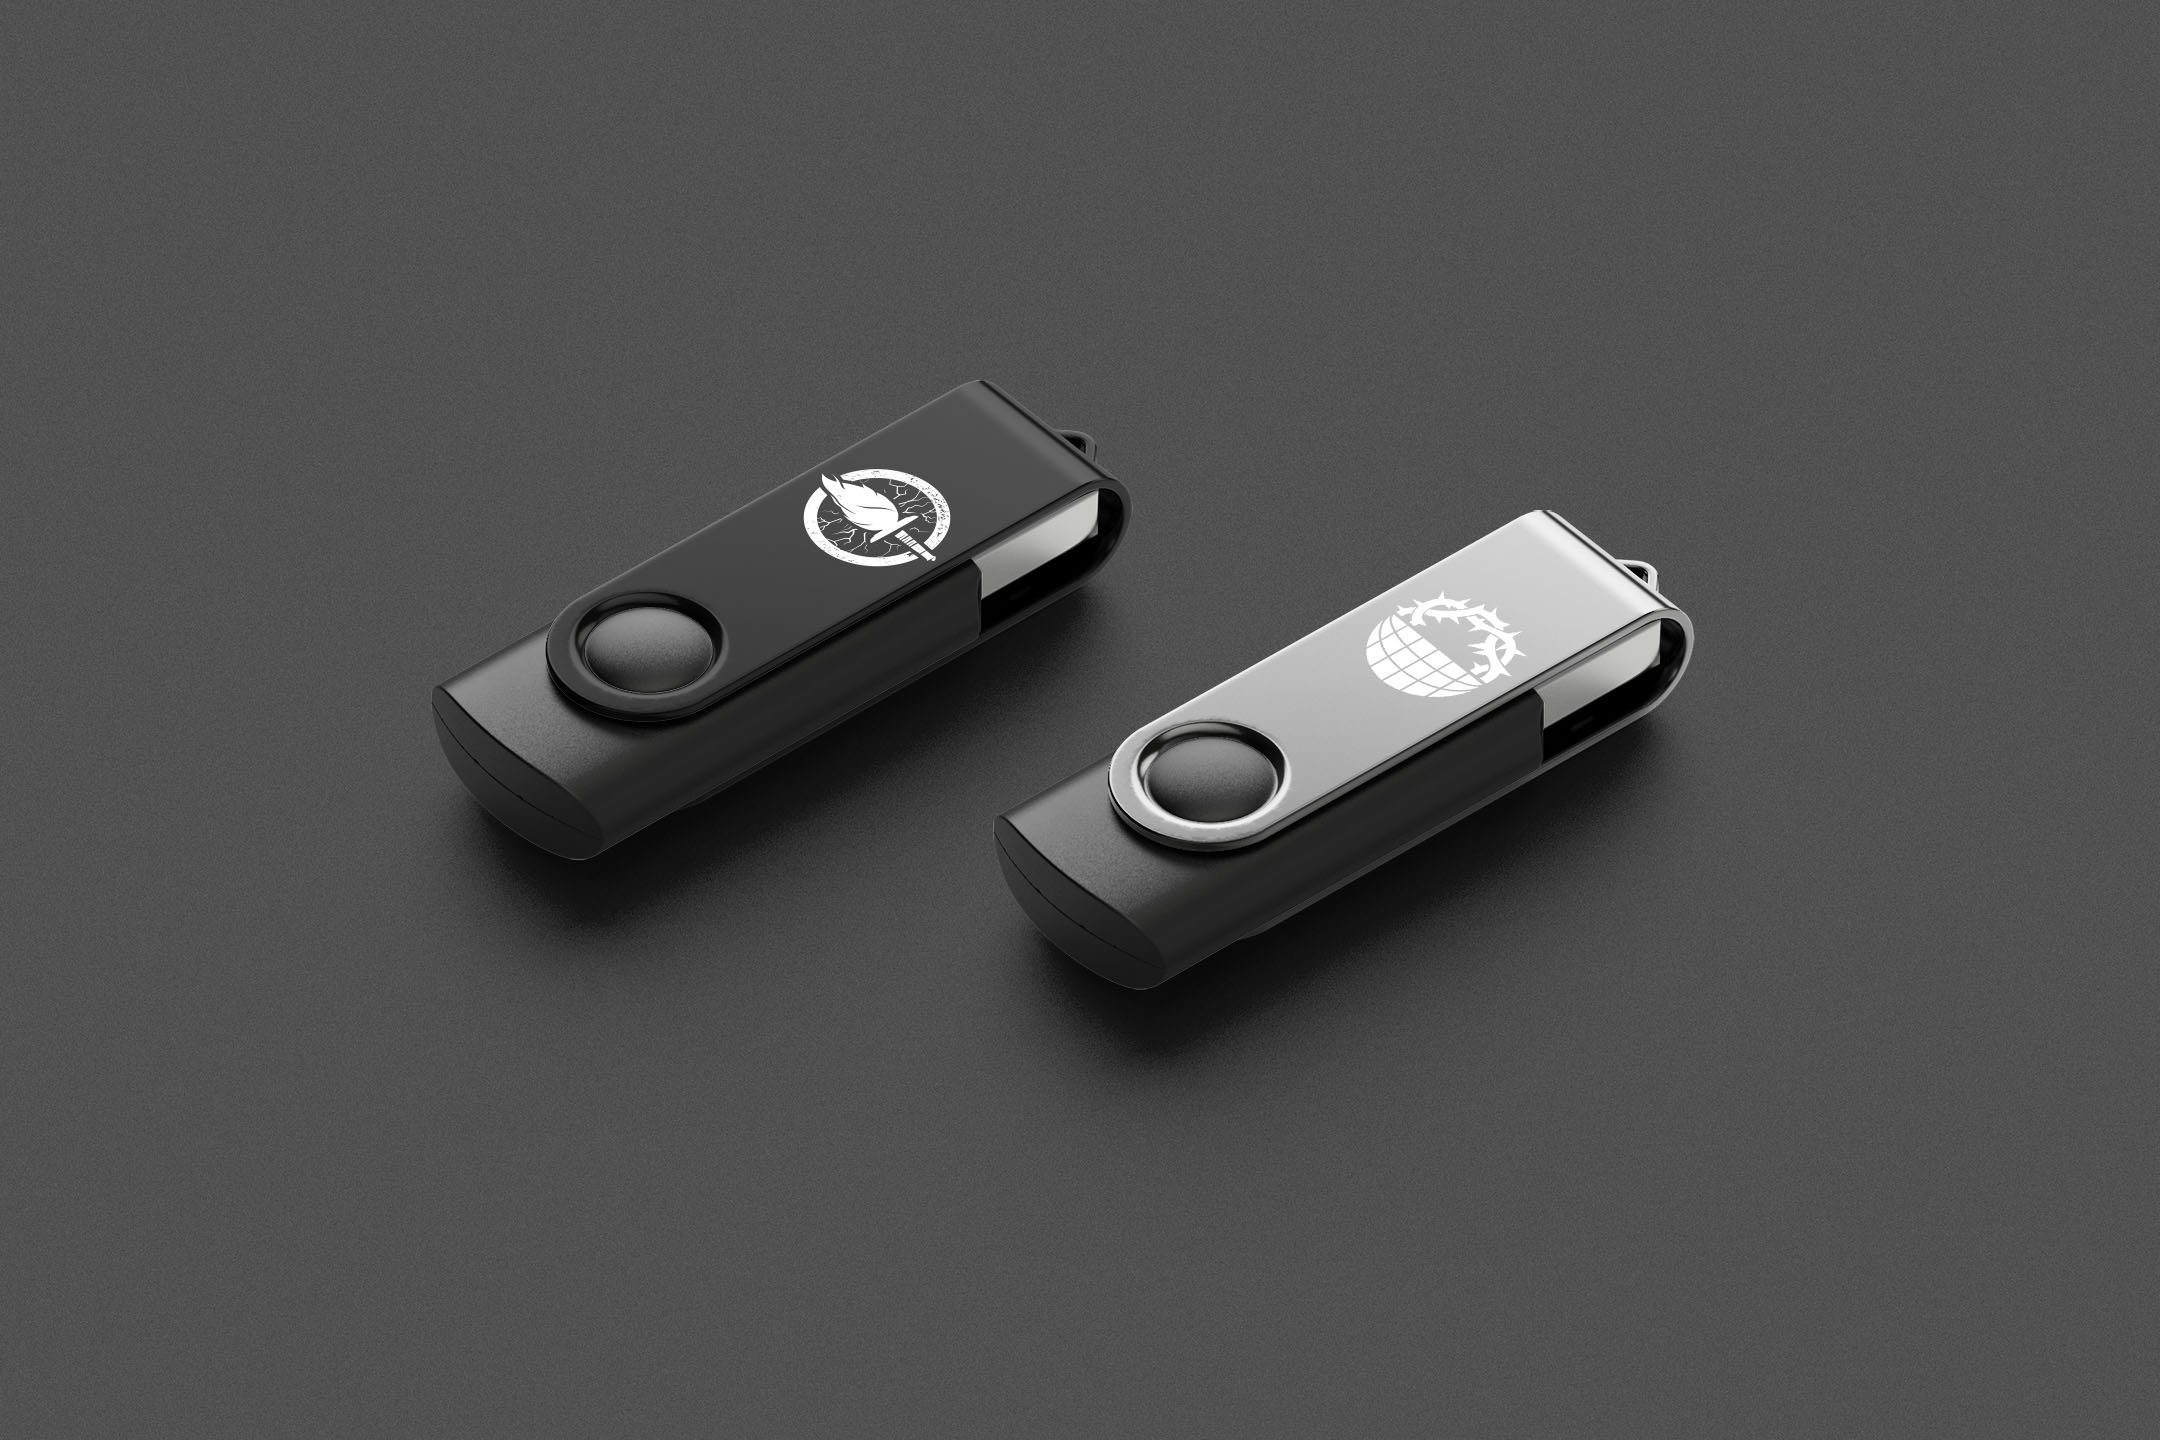 USB thumb drive sticks with their respective emblems printed on the metal casing.